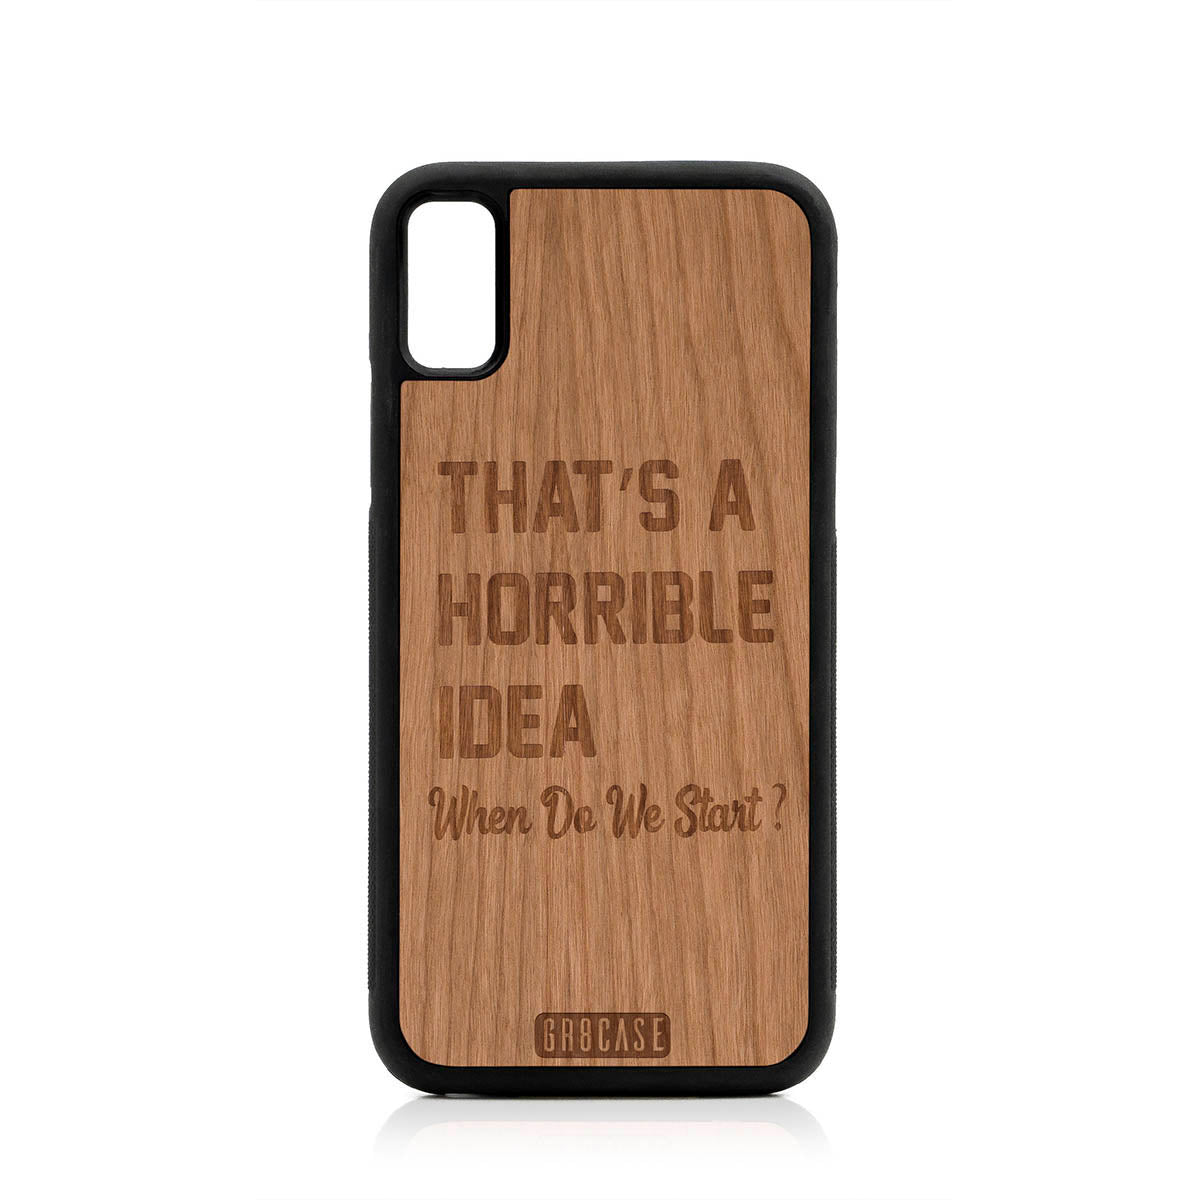 That's A Horrible idea When Do We Start? Design Wood Case For iPhone XR